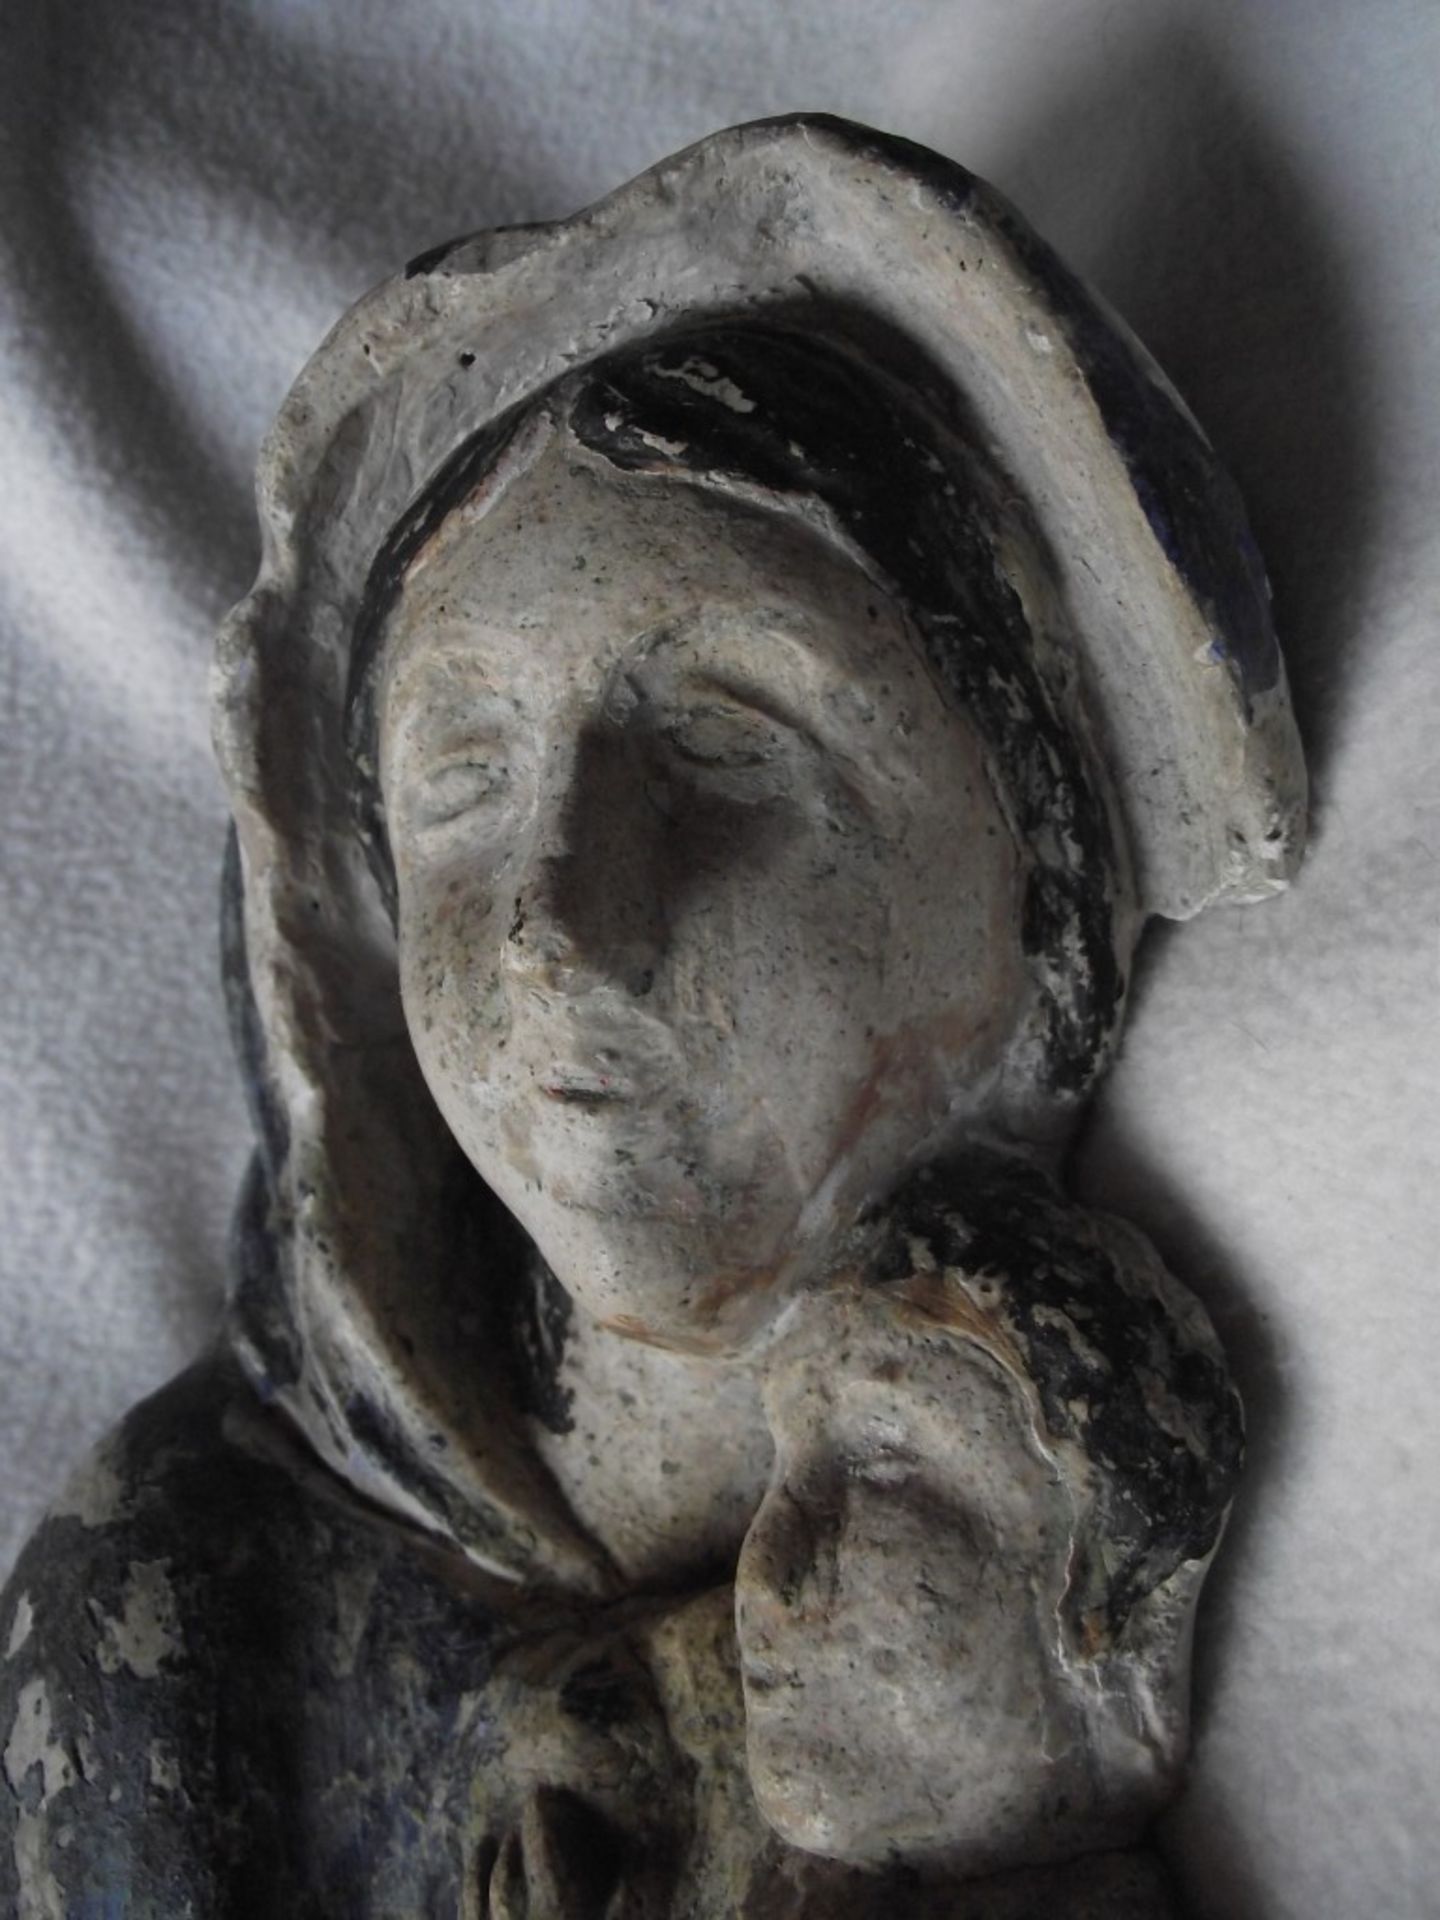 Antique Madonna & Child Wall Hanging Figure - 11 3/4"" High. - Image 9 of 21